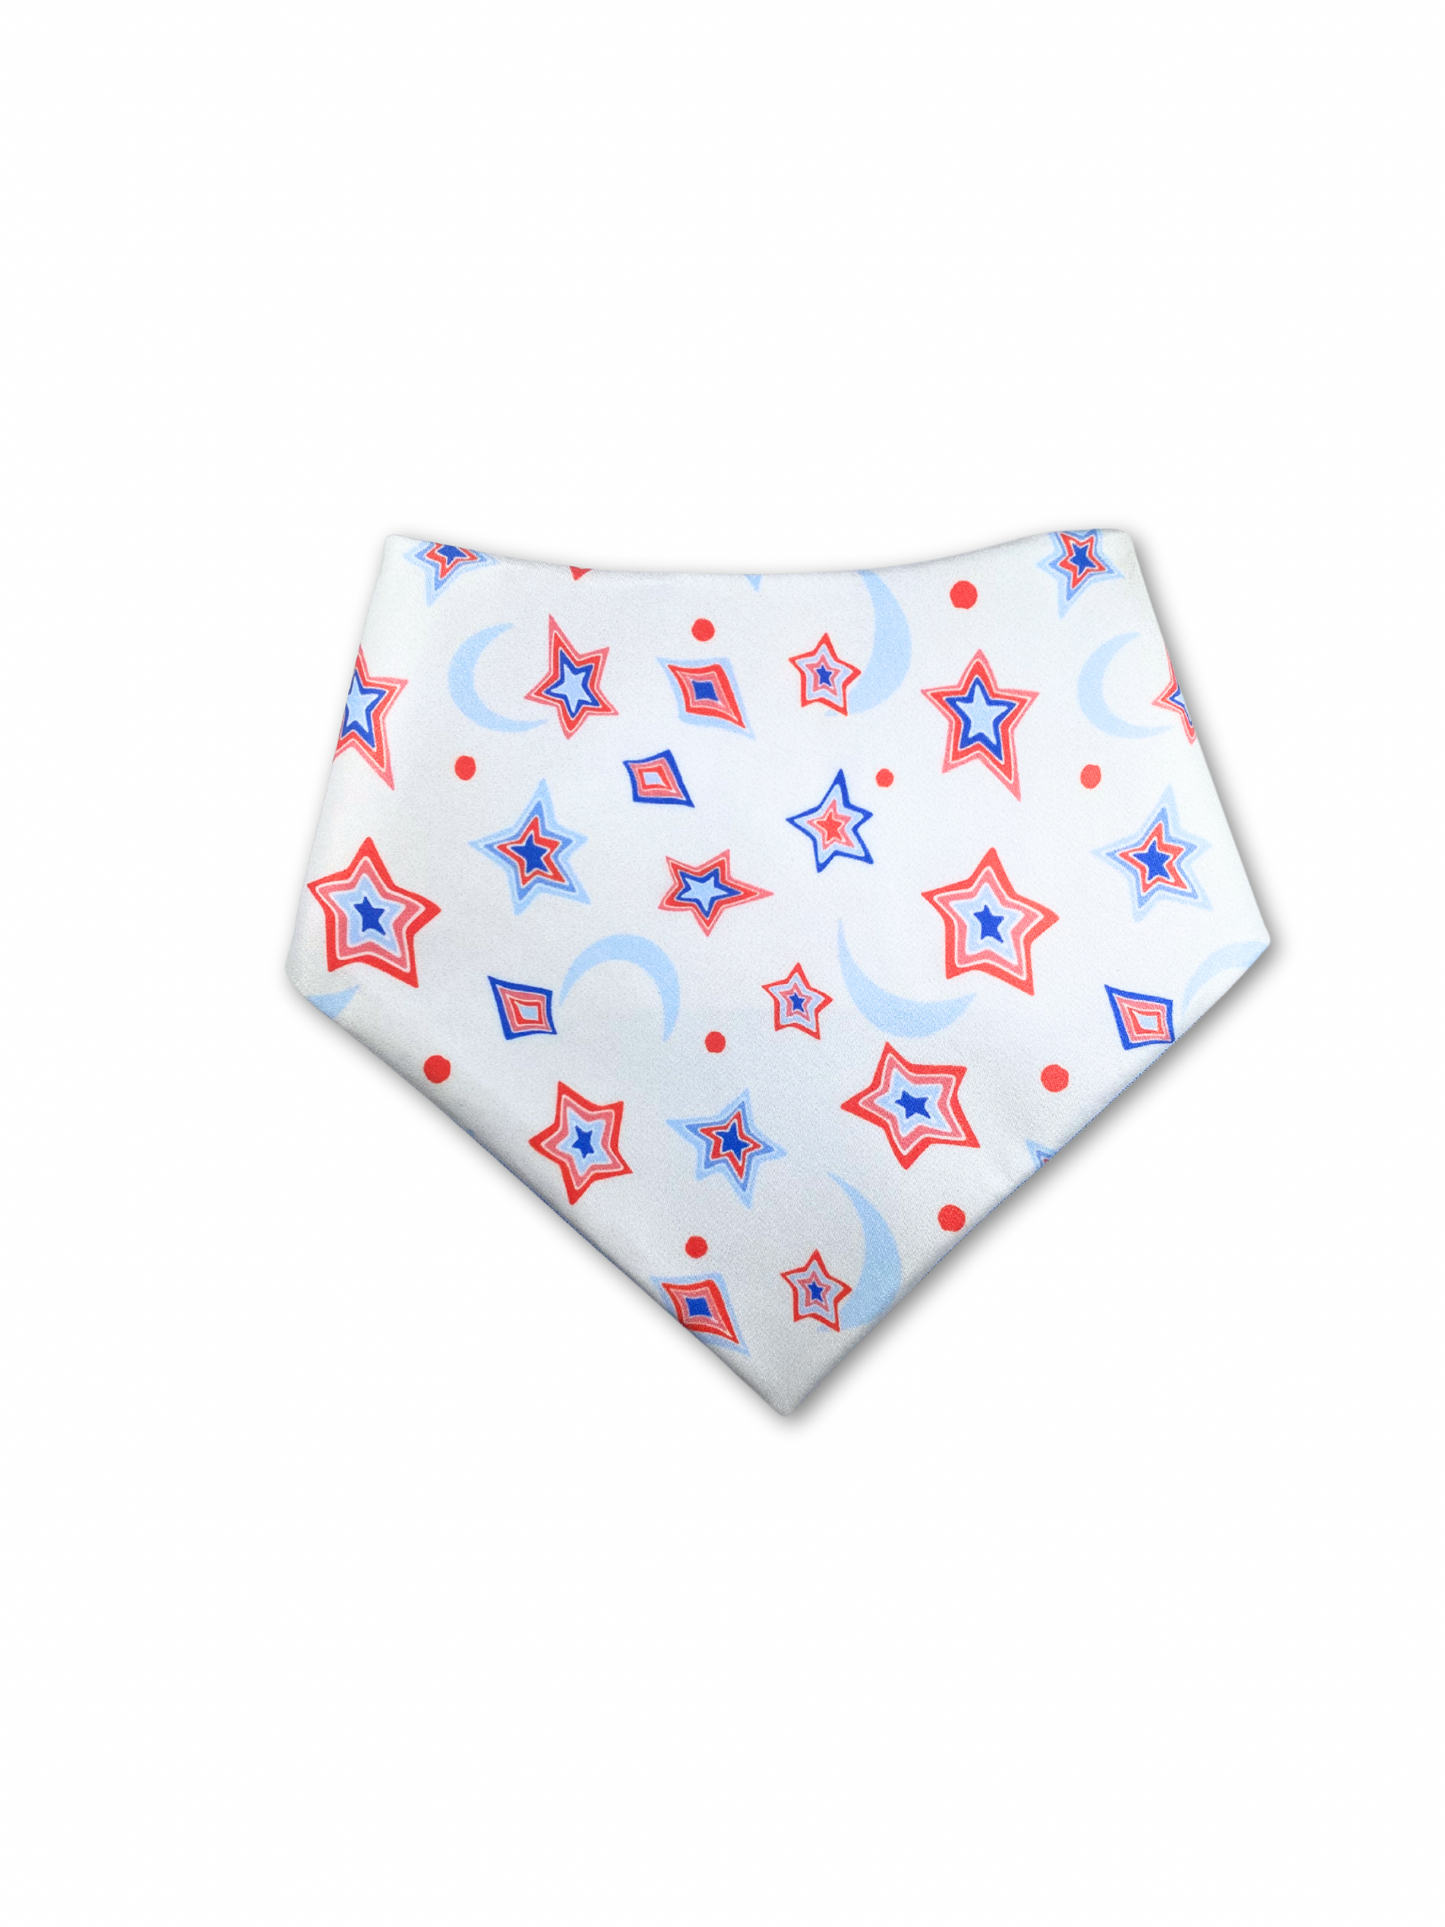 Red, white, and blue overall-shaped dog bandana, perfect for Memorial Day celebrations. This bandana features a festive star print, adding a touch of Americana to your pet's patriotic look.